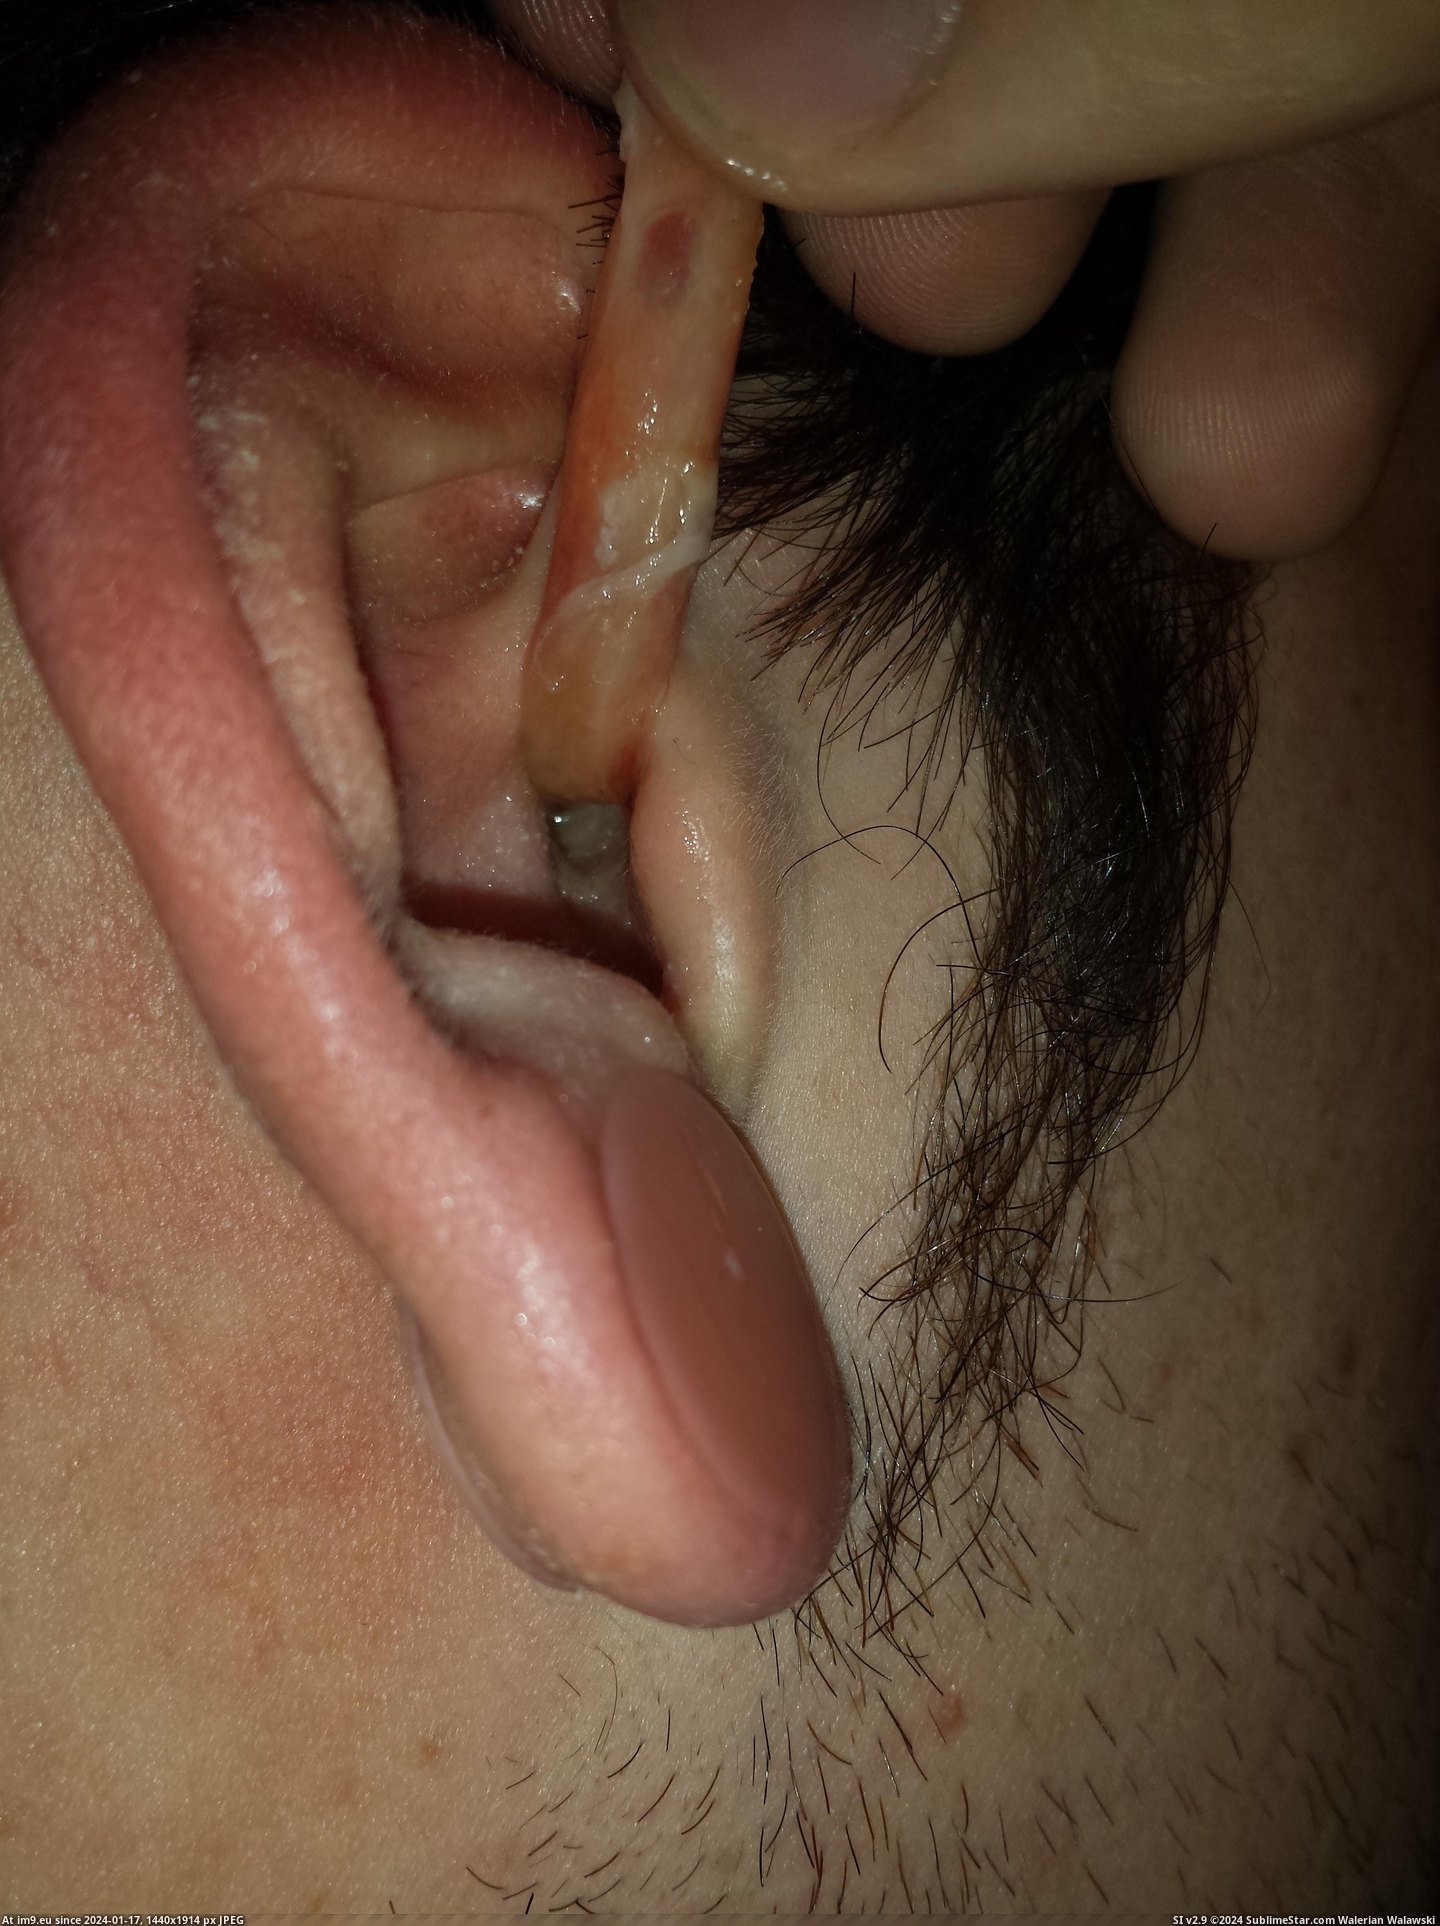 #Wtf #Ear #Infection #Crazy [Wtf] My crazy ear infection 1 Pic. (Image of album My r/WTF favs))